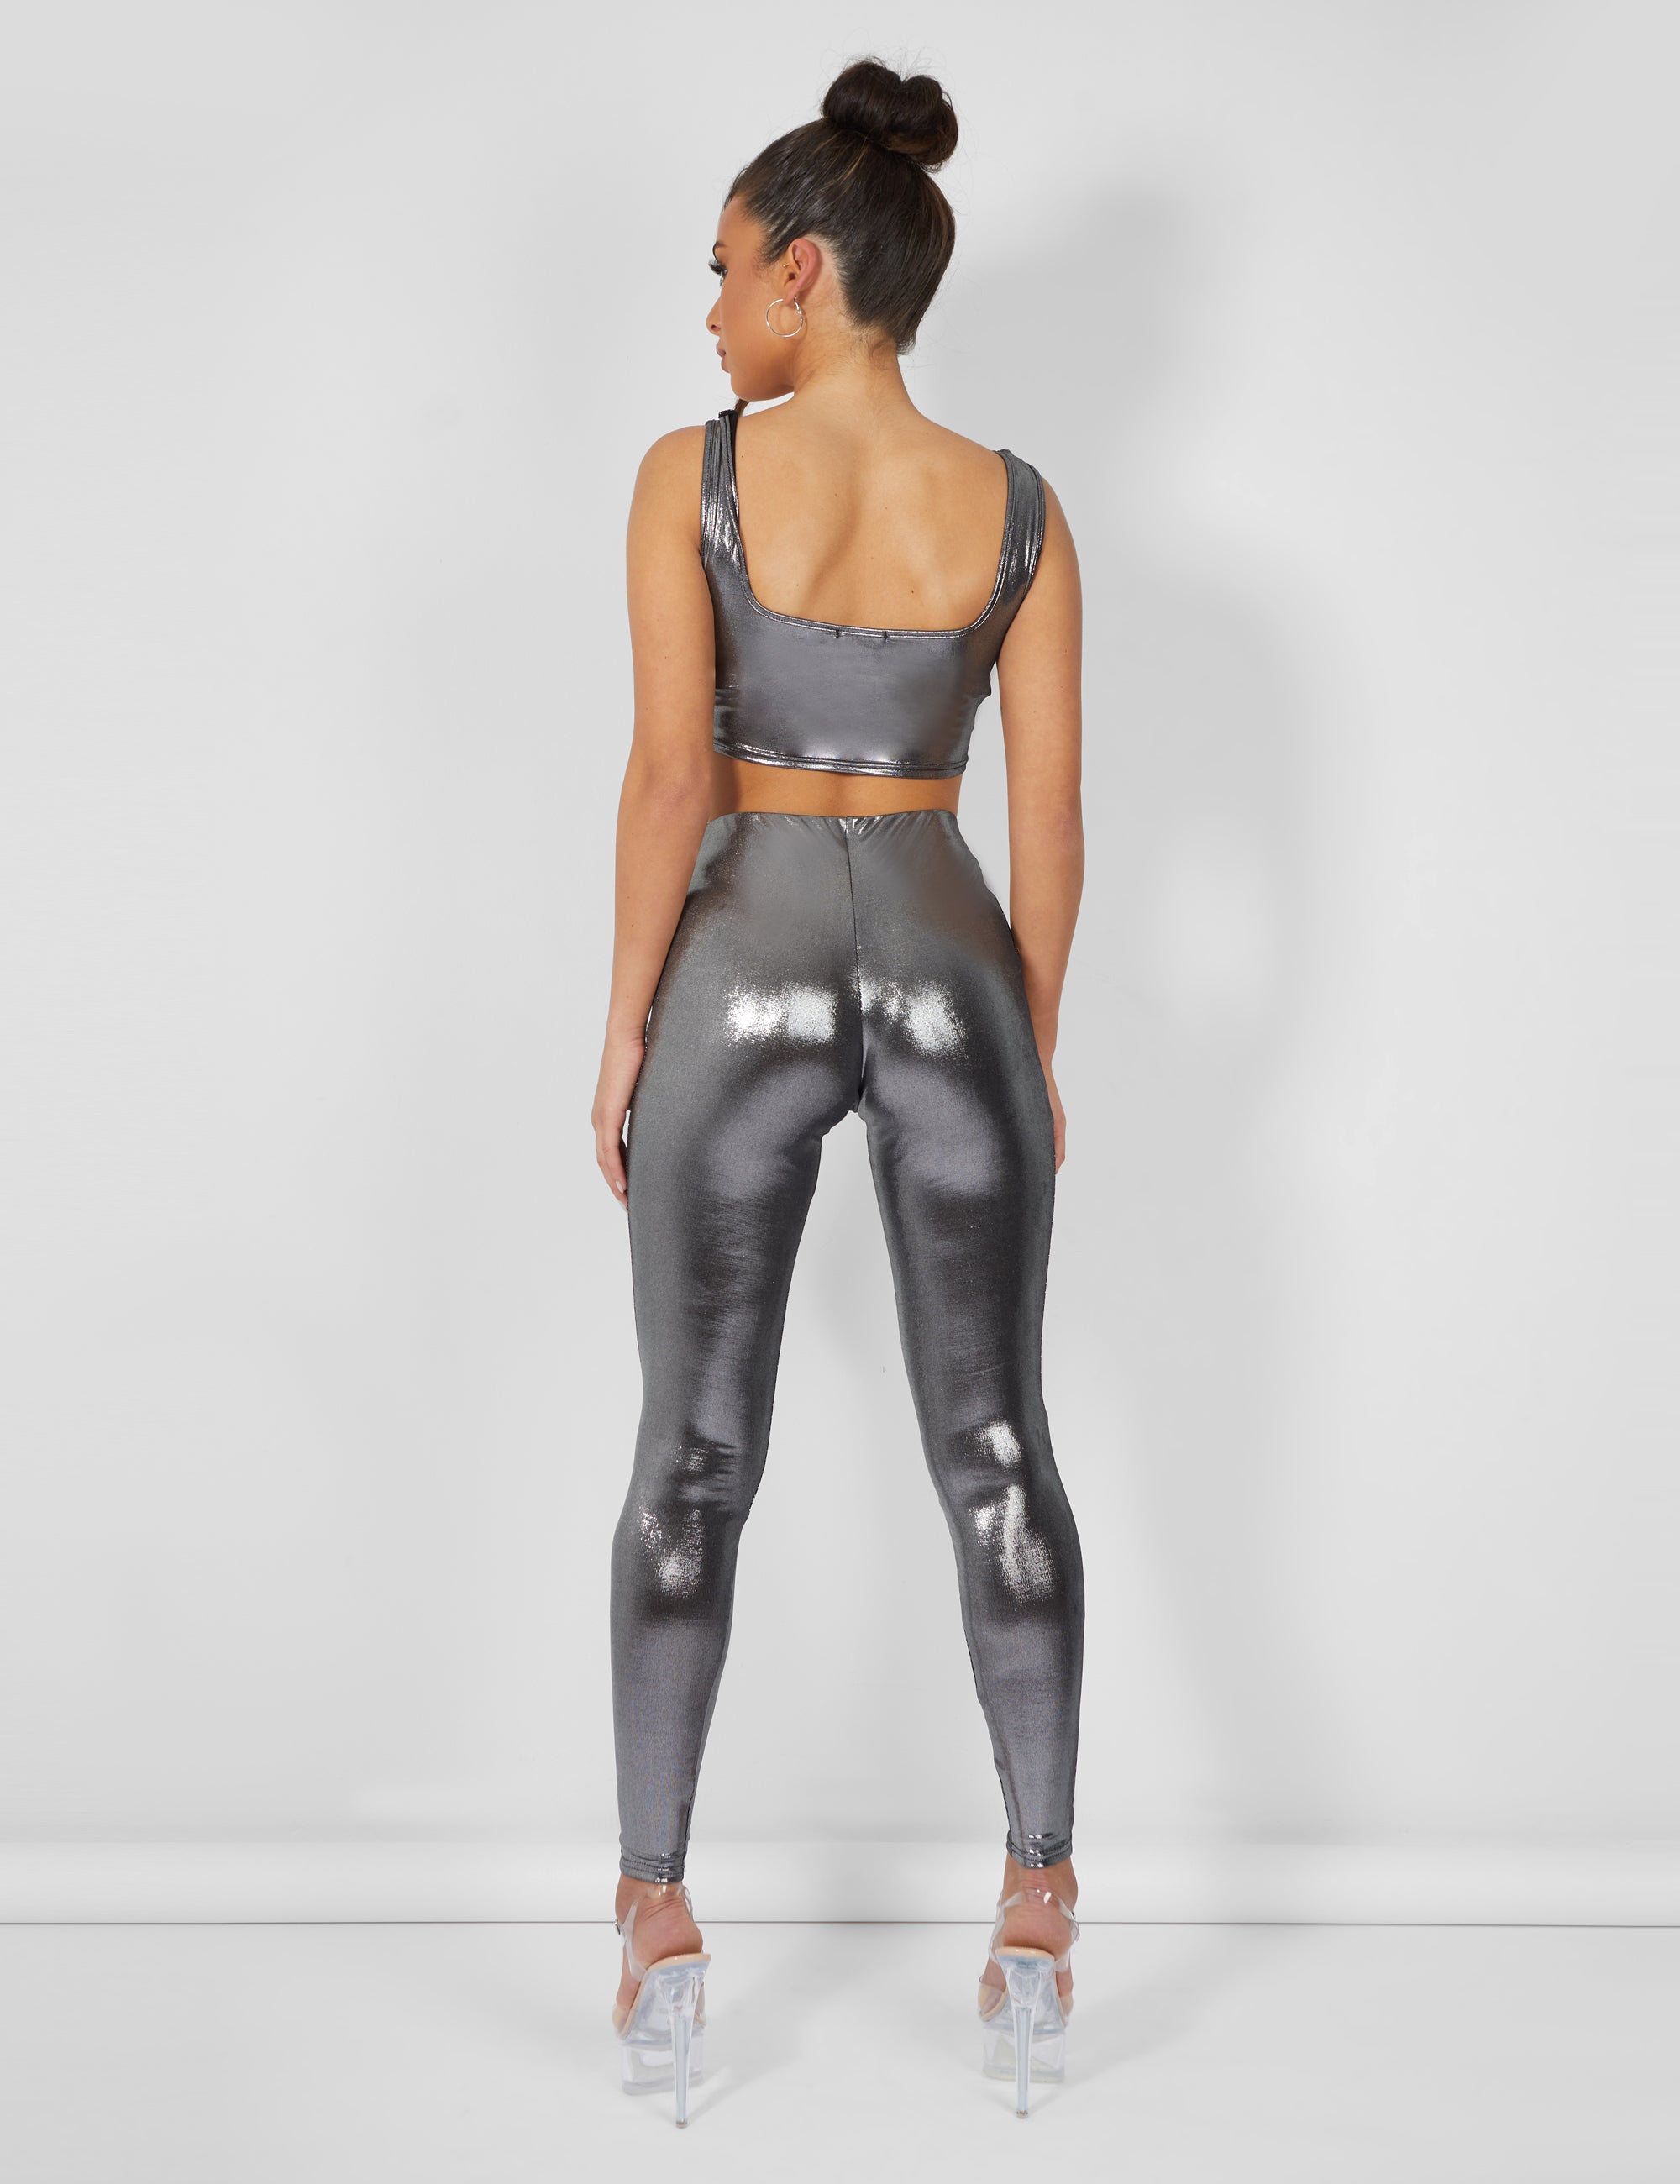 Silver Wet Look Leggings Clothing Quicksilver Metallic Effect Stretching Tights  Shiny Women Streetwear Slim Fit Liquid Tights Pants -  Canada